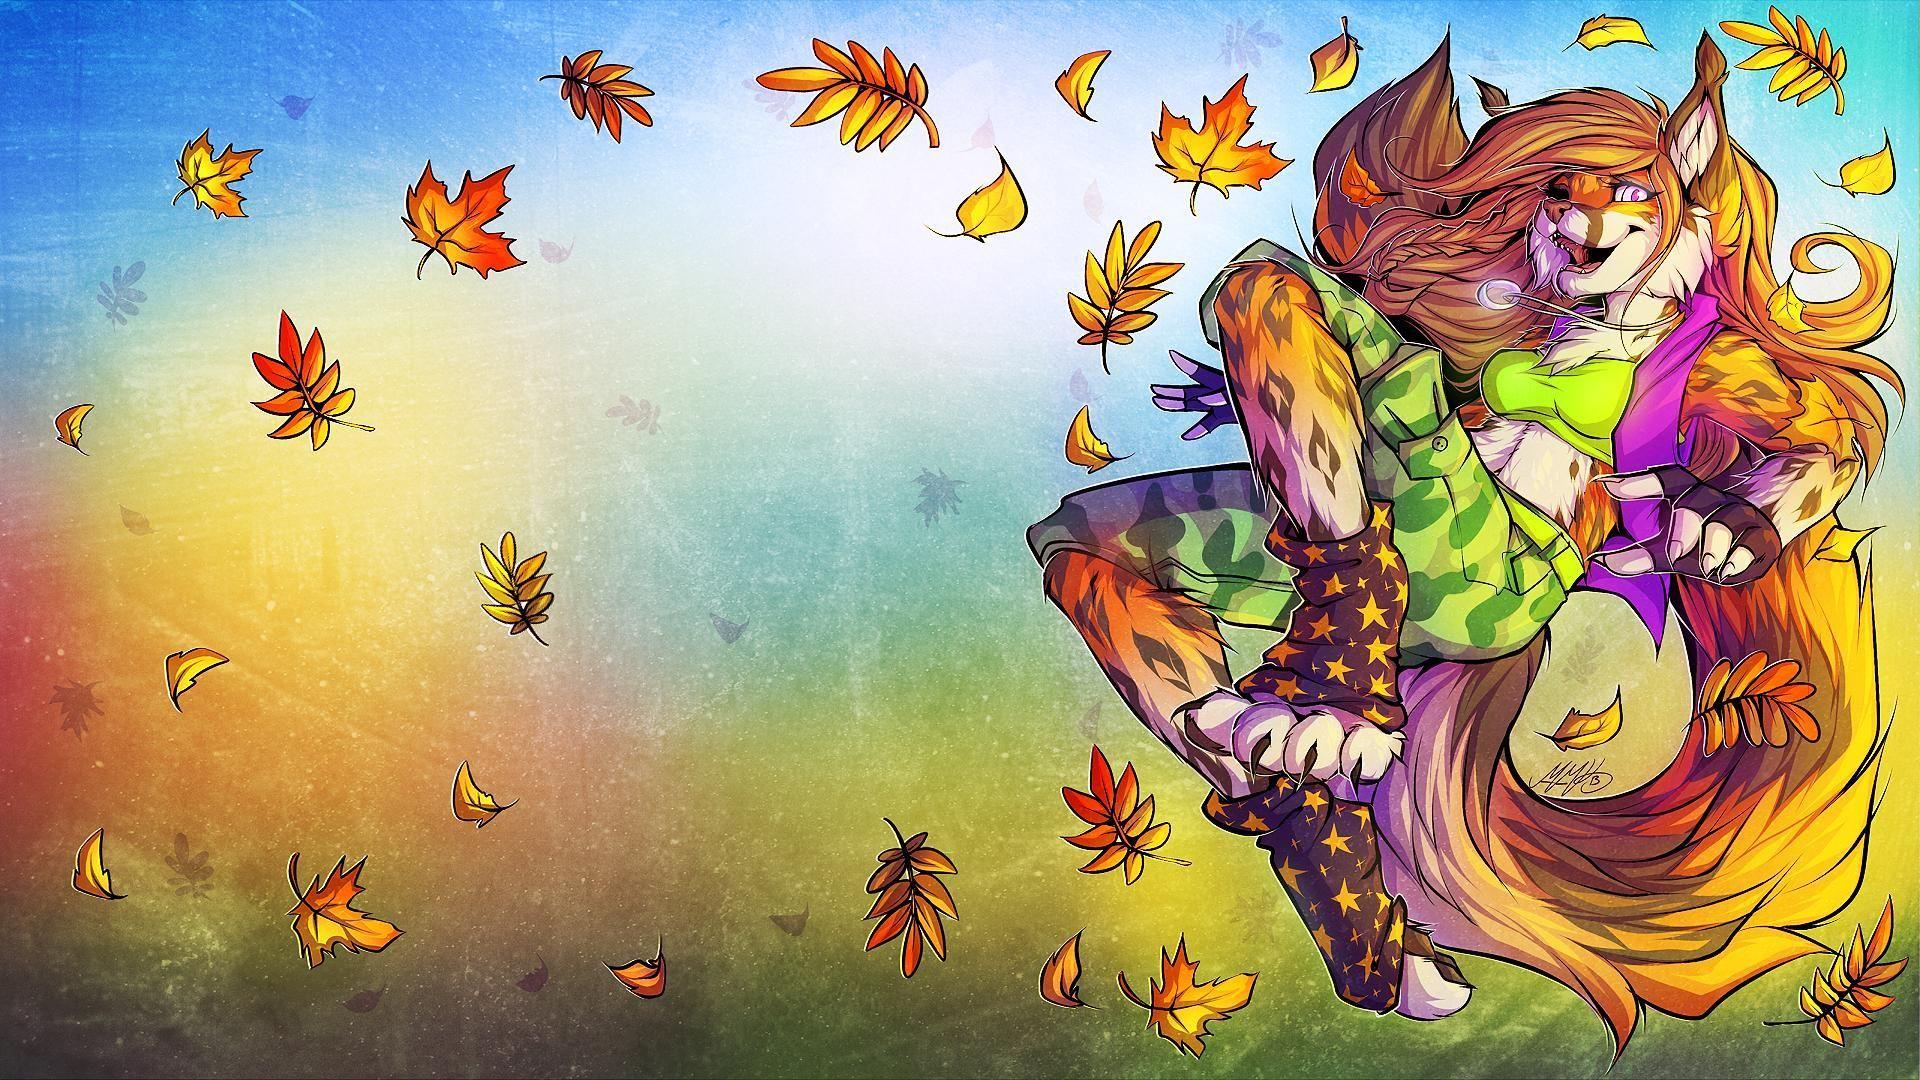 Background In High Quality: Furry by Cordelia Shaughnessy, April 9